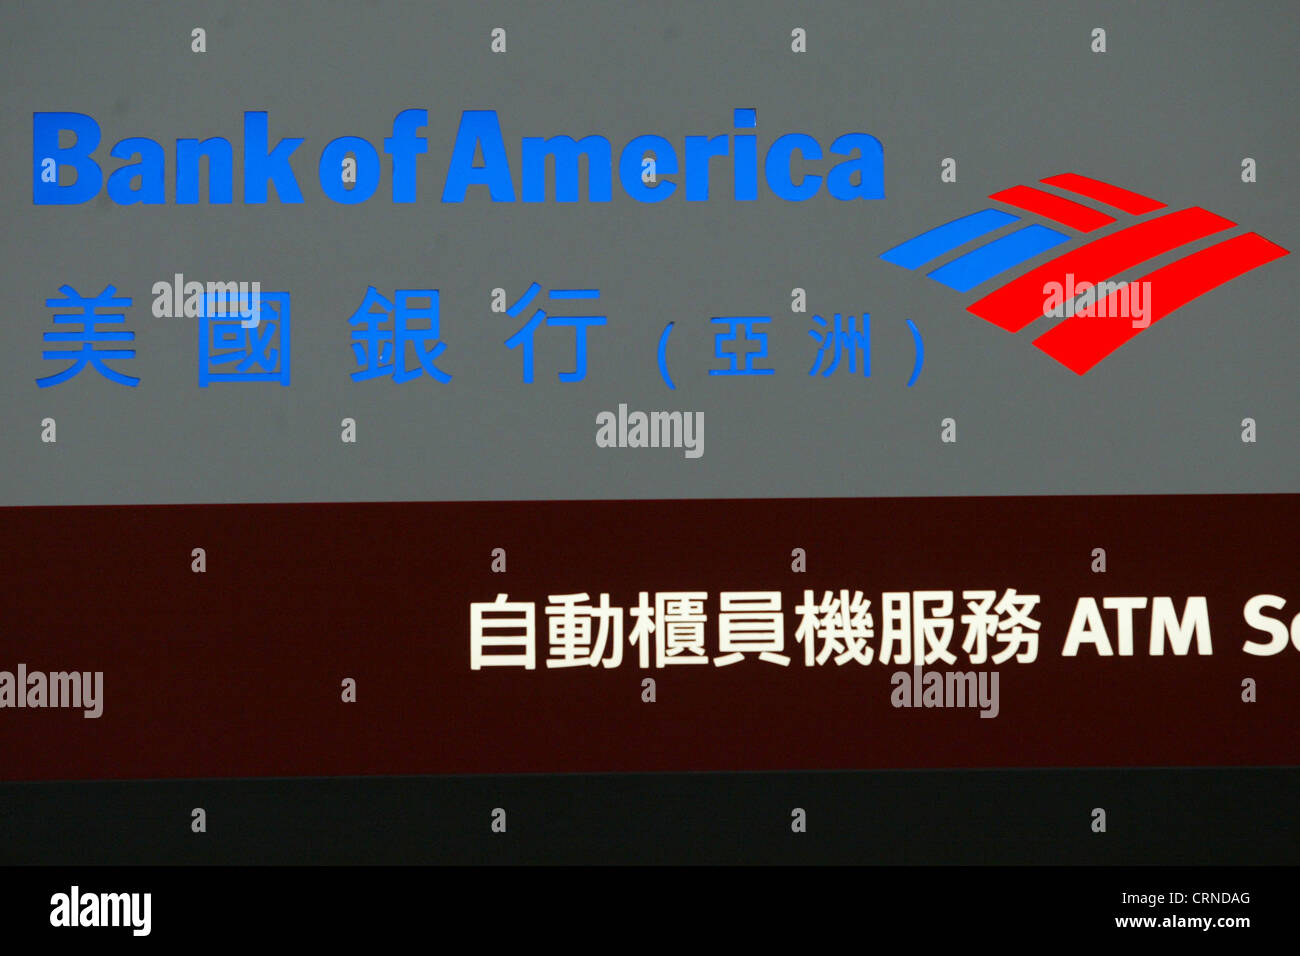 logo-of-the-bank-of-america-in-english-and-chinese-CRNDAG.jpg